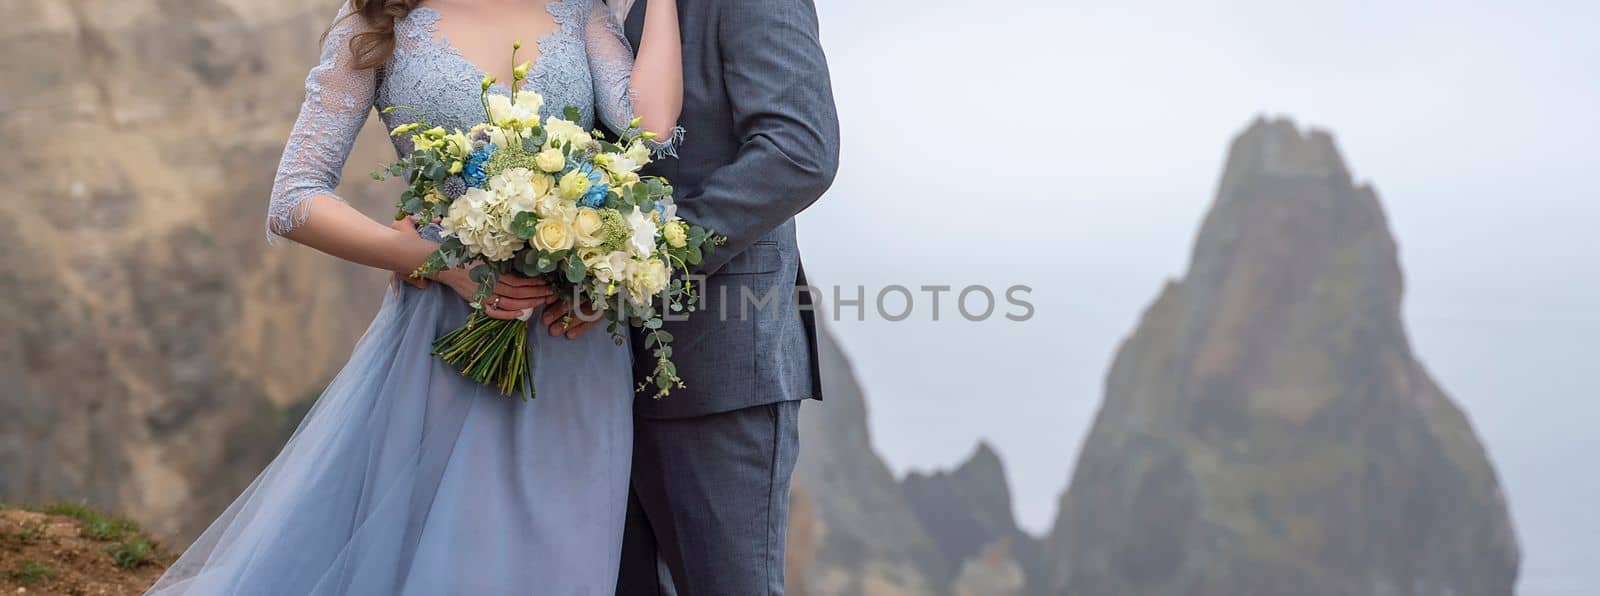 a couple standing in an embrace holding a beautiful bouquet of flowers, a girl dressed in a blue long dress, a man dressed in a suit. wedding concept by Matiunina